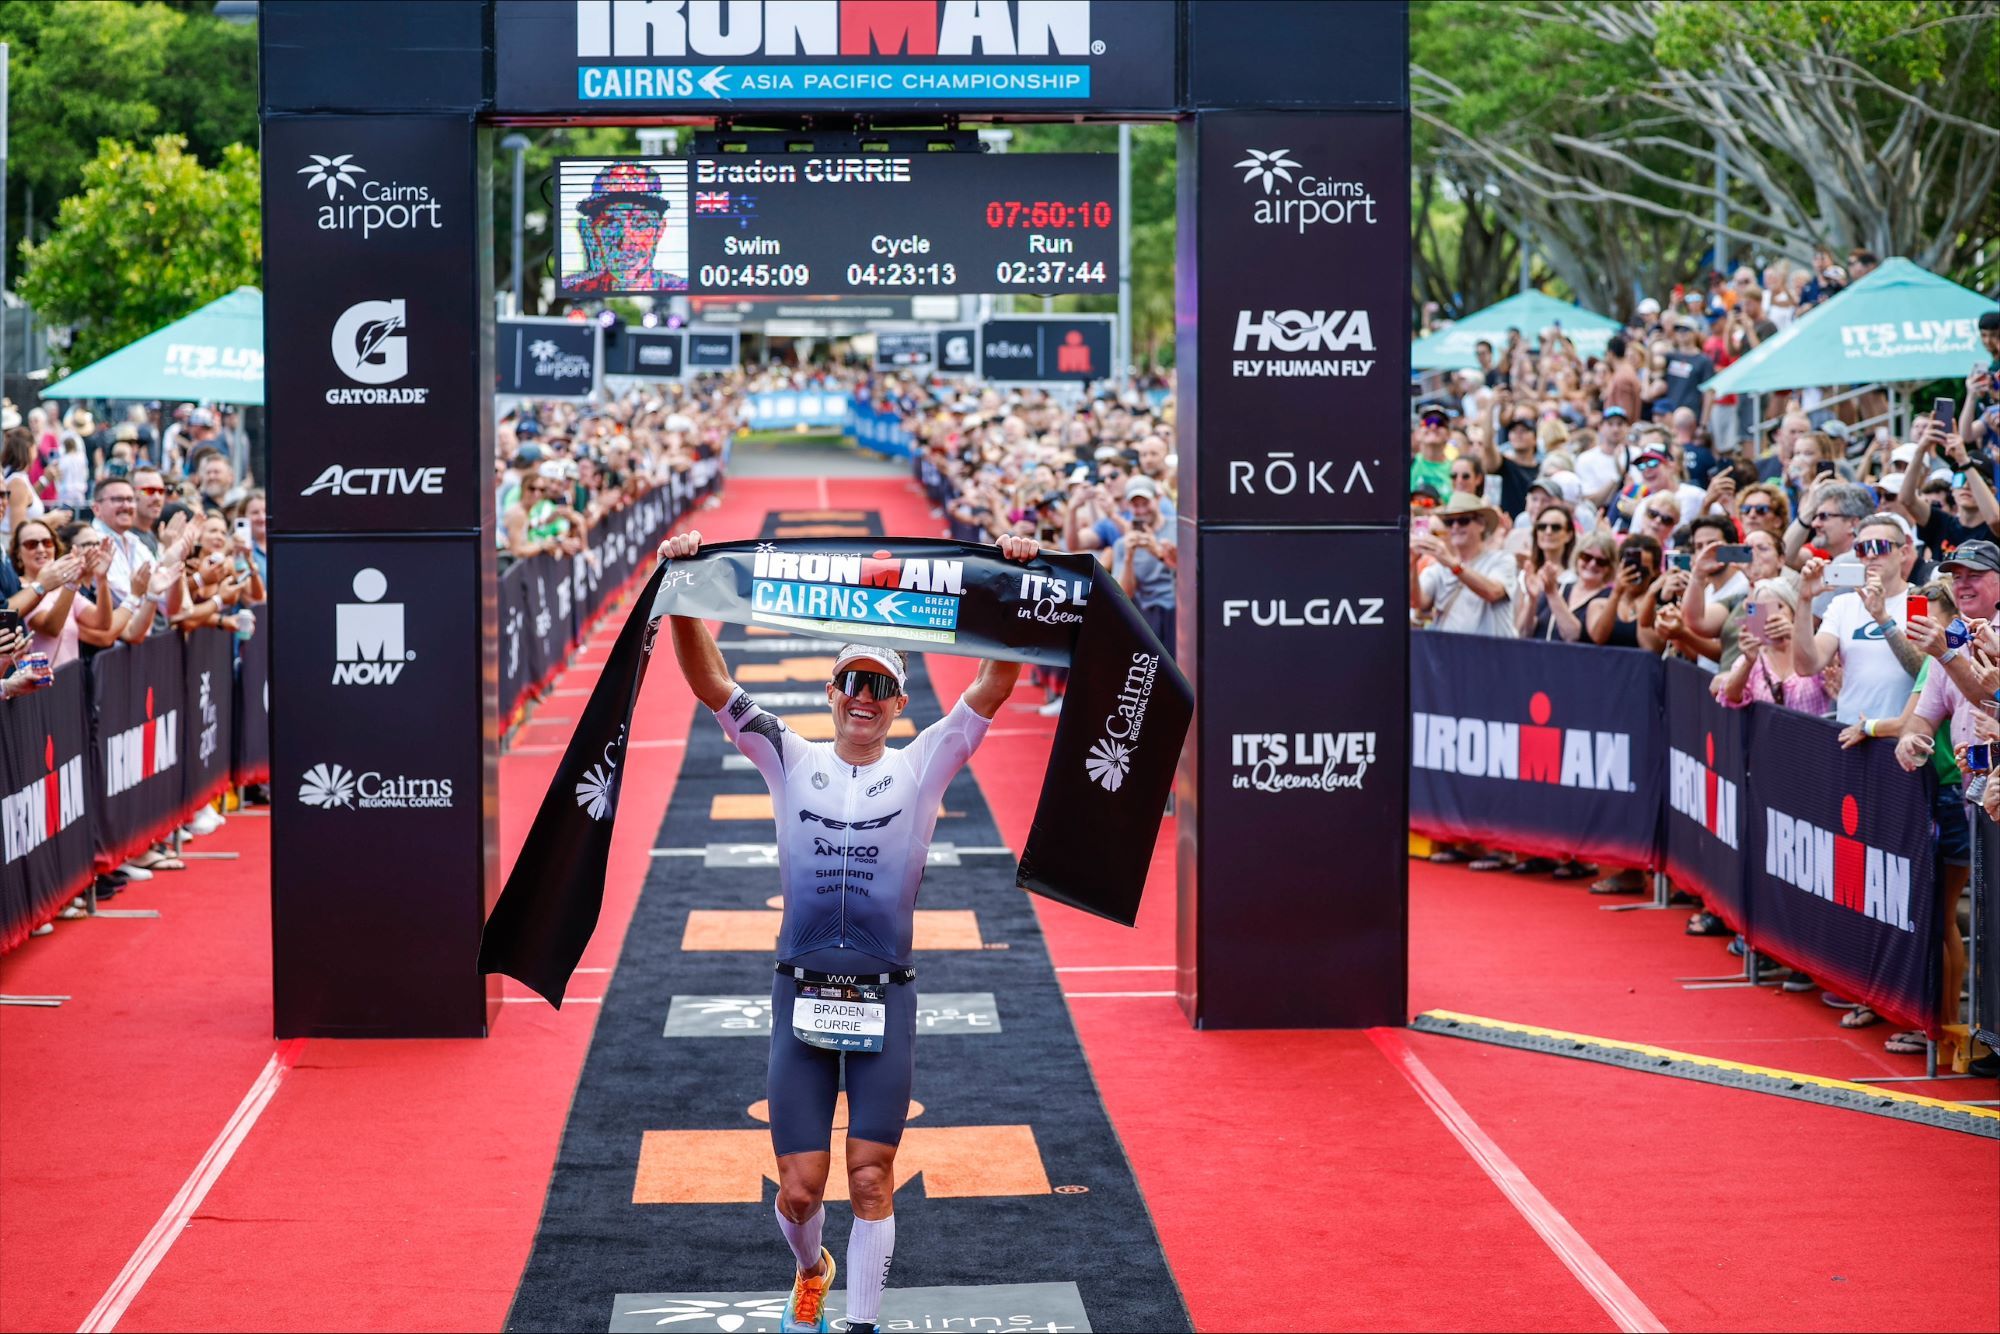 Braden Currie and Kylie Simpson Win at Ironman AsiaPacific Championship